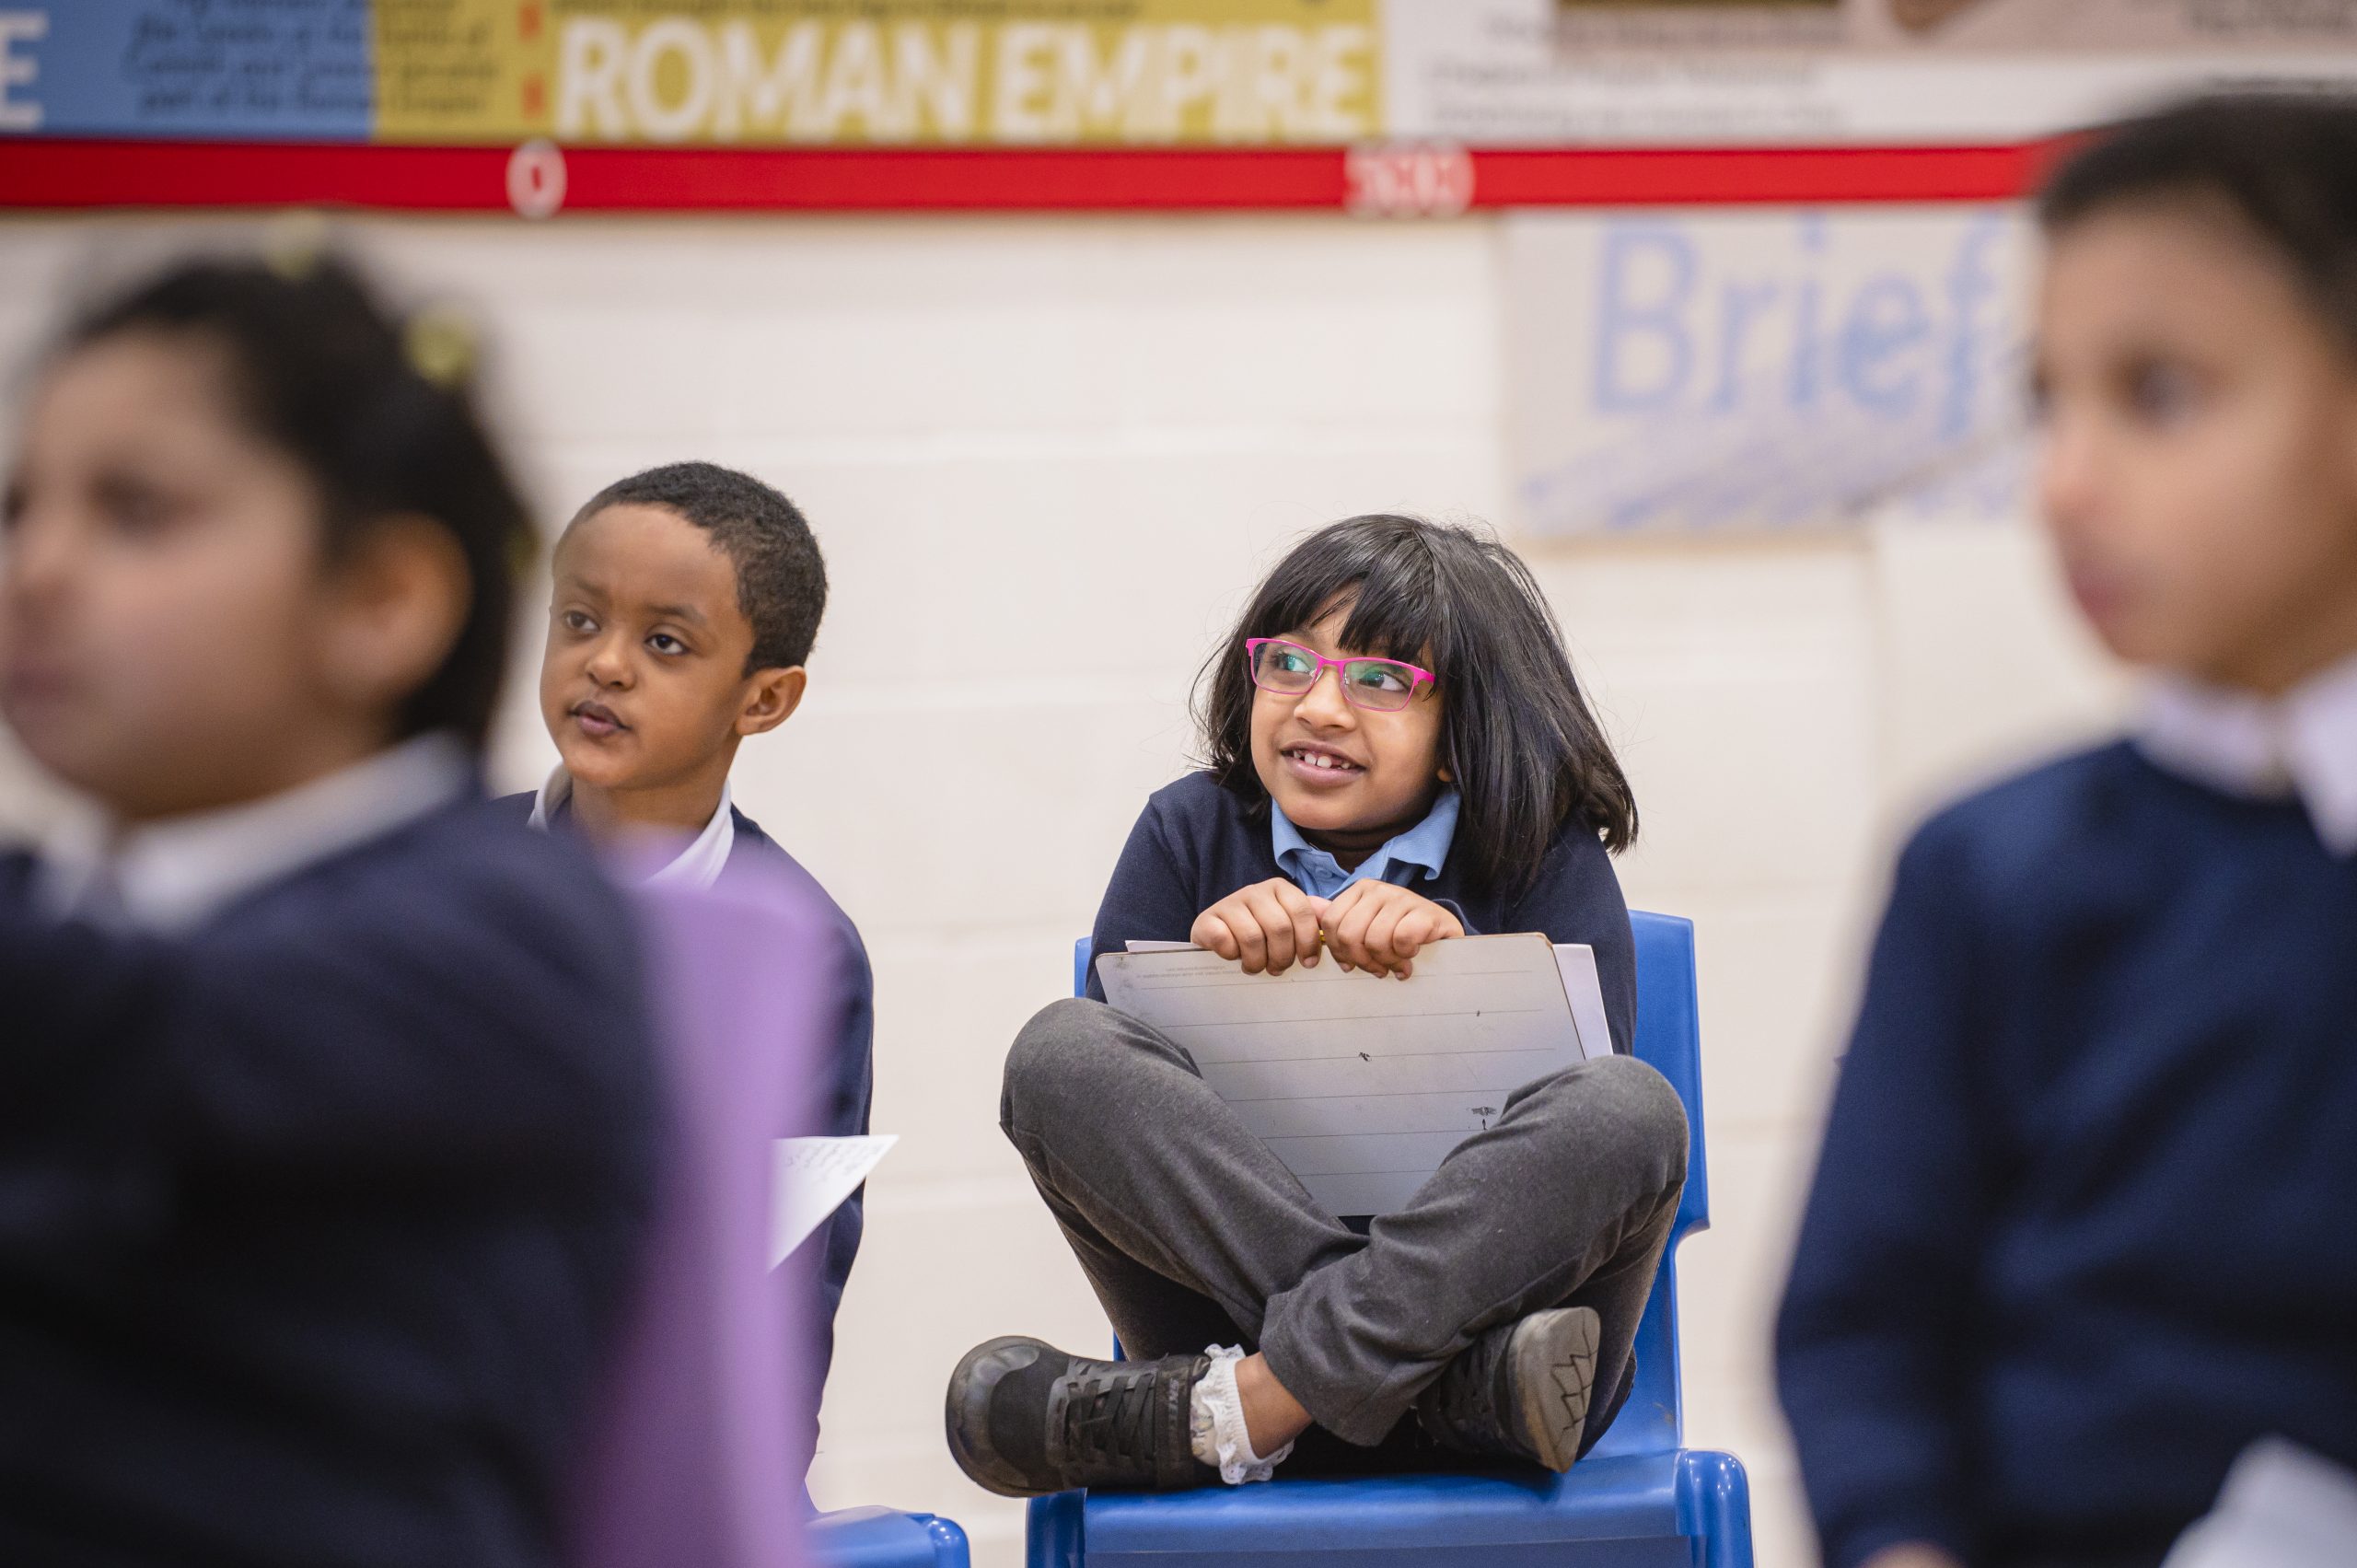 A young South Asian girl sat in primary school